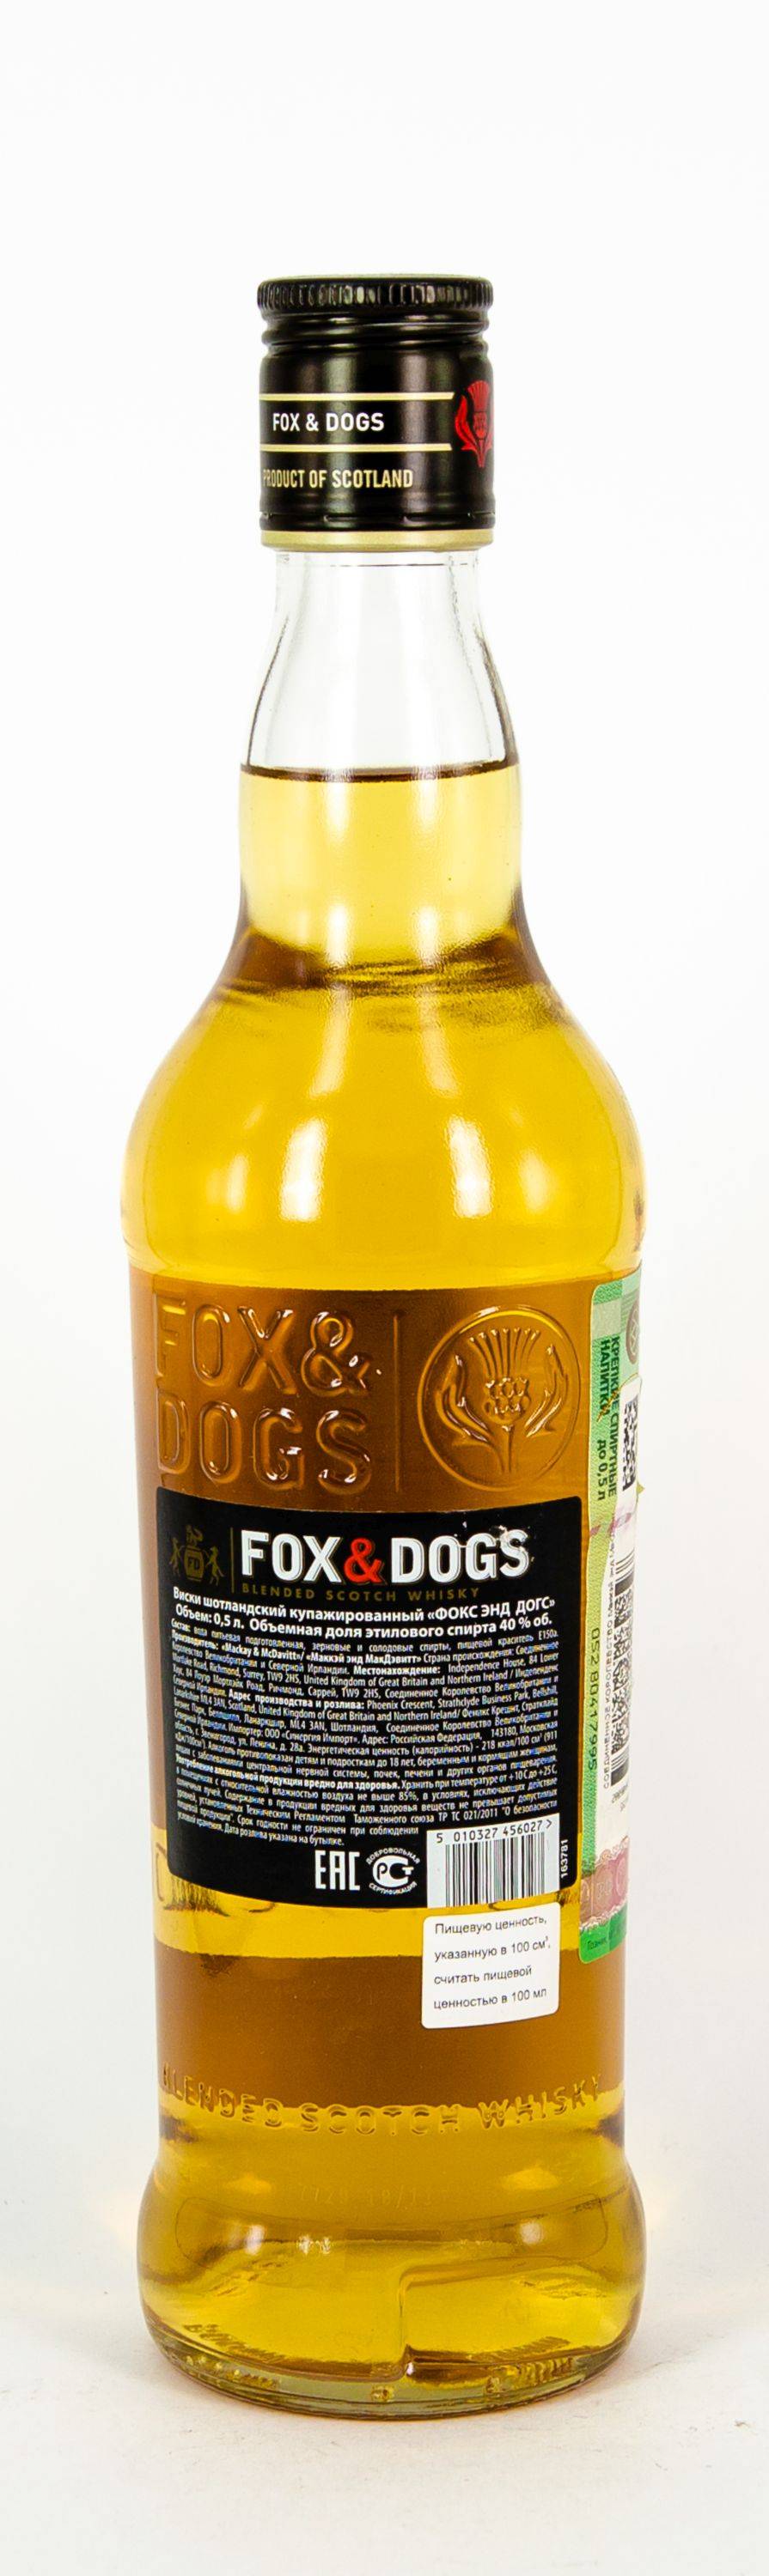 Fox and dogs отзывы. Виски Fox and Dogs 0.250. Виски Fox Dogs 0.5. Фокс догс виски 0.25. Виски Фокс энд догс 0,5л.